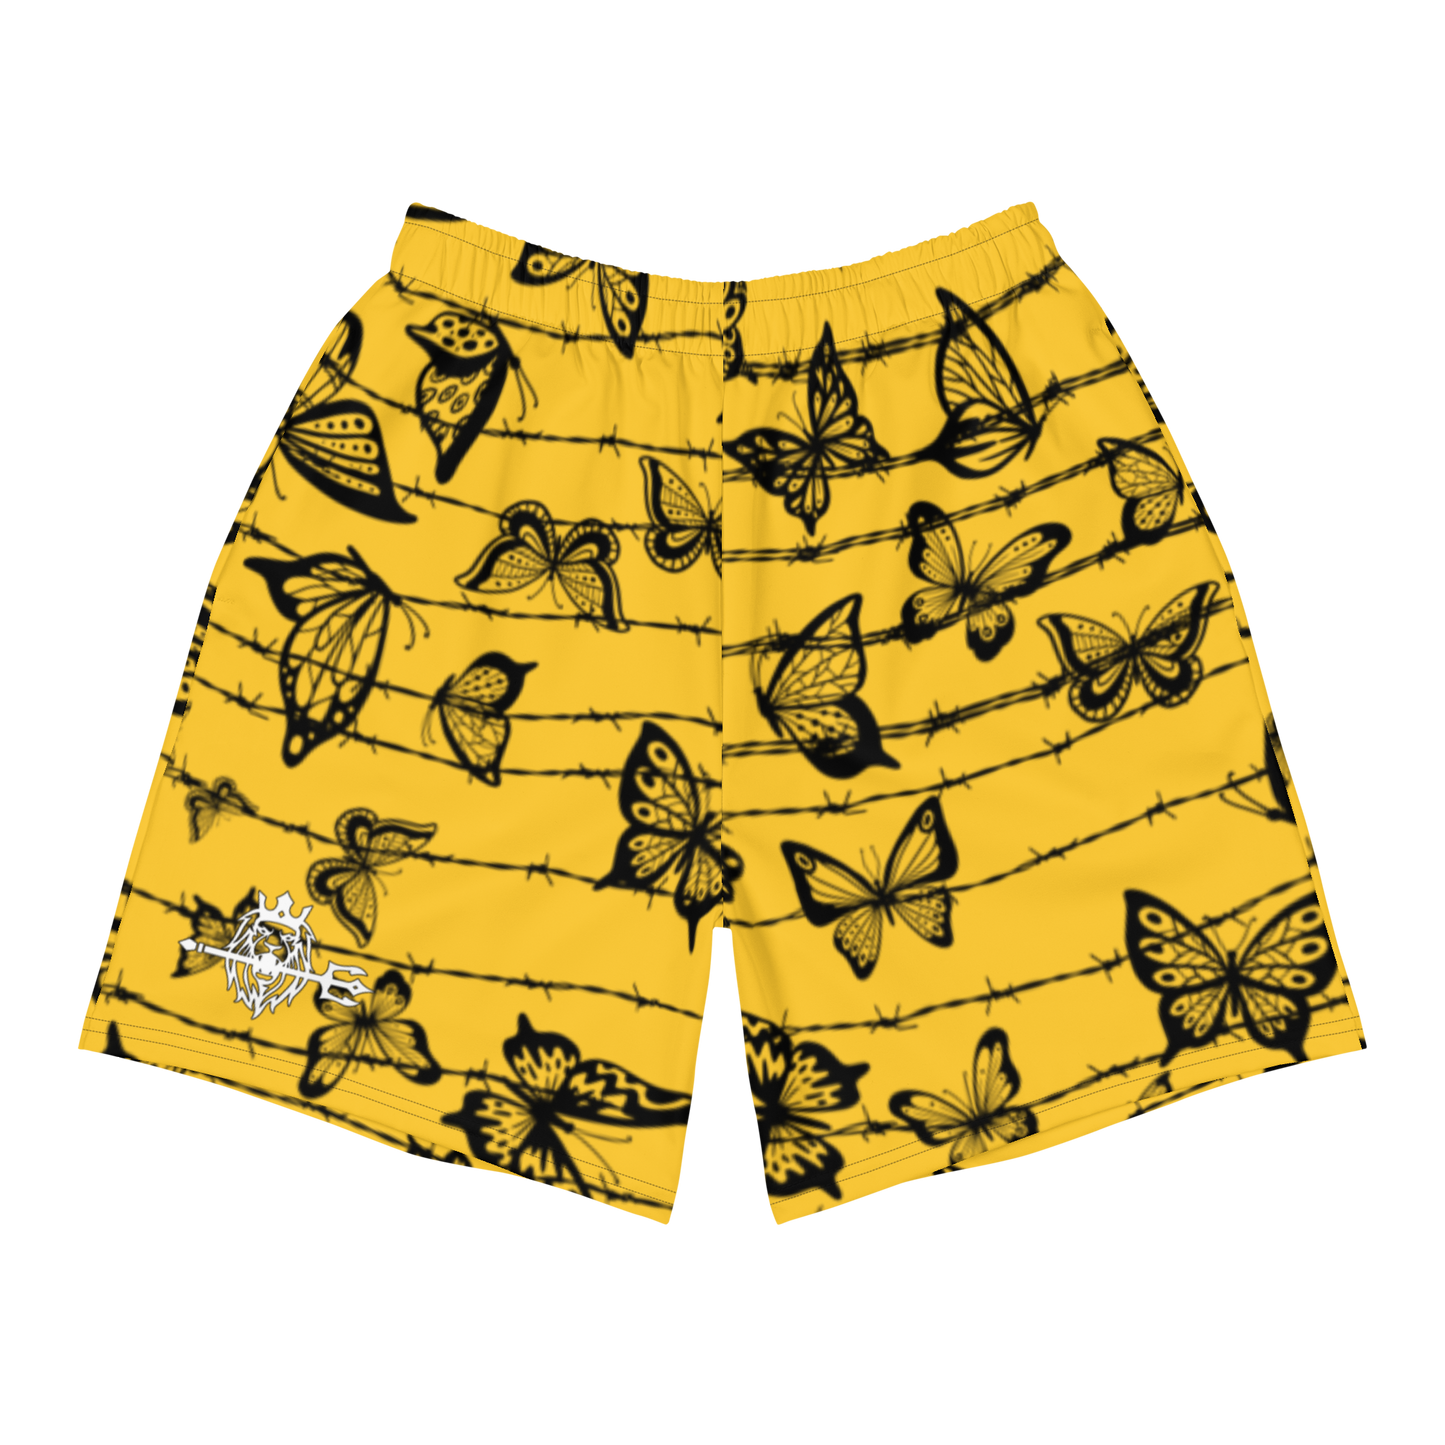 "BUTTERFLY EFFECT" SHORTS